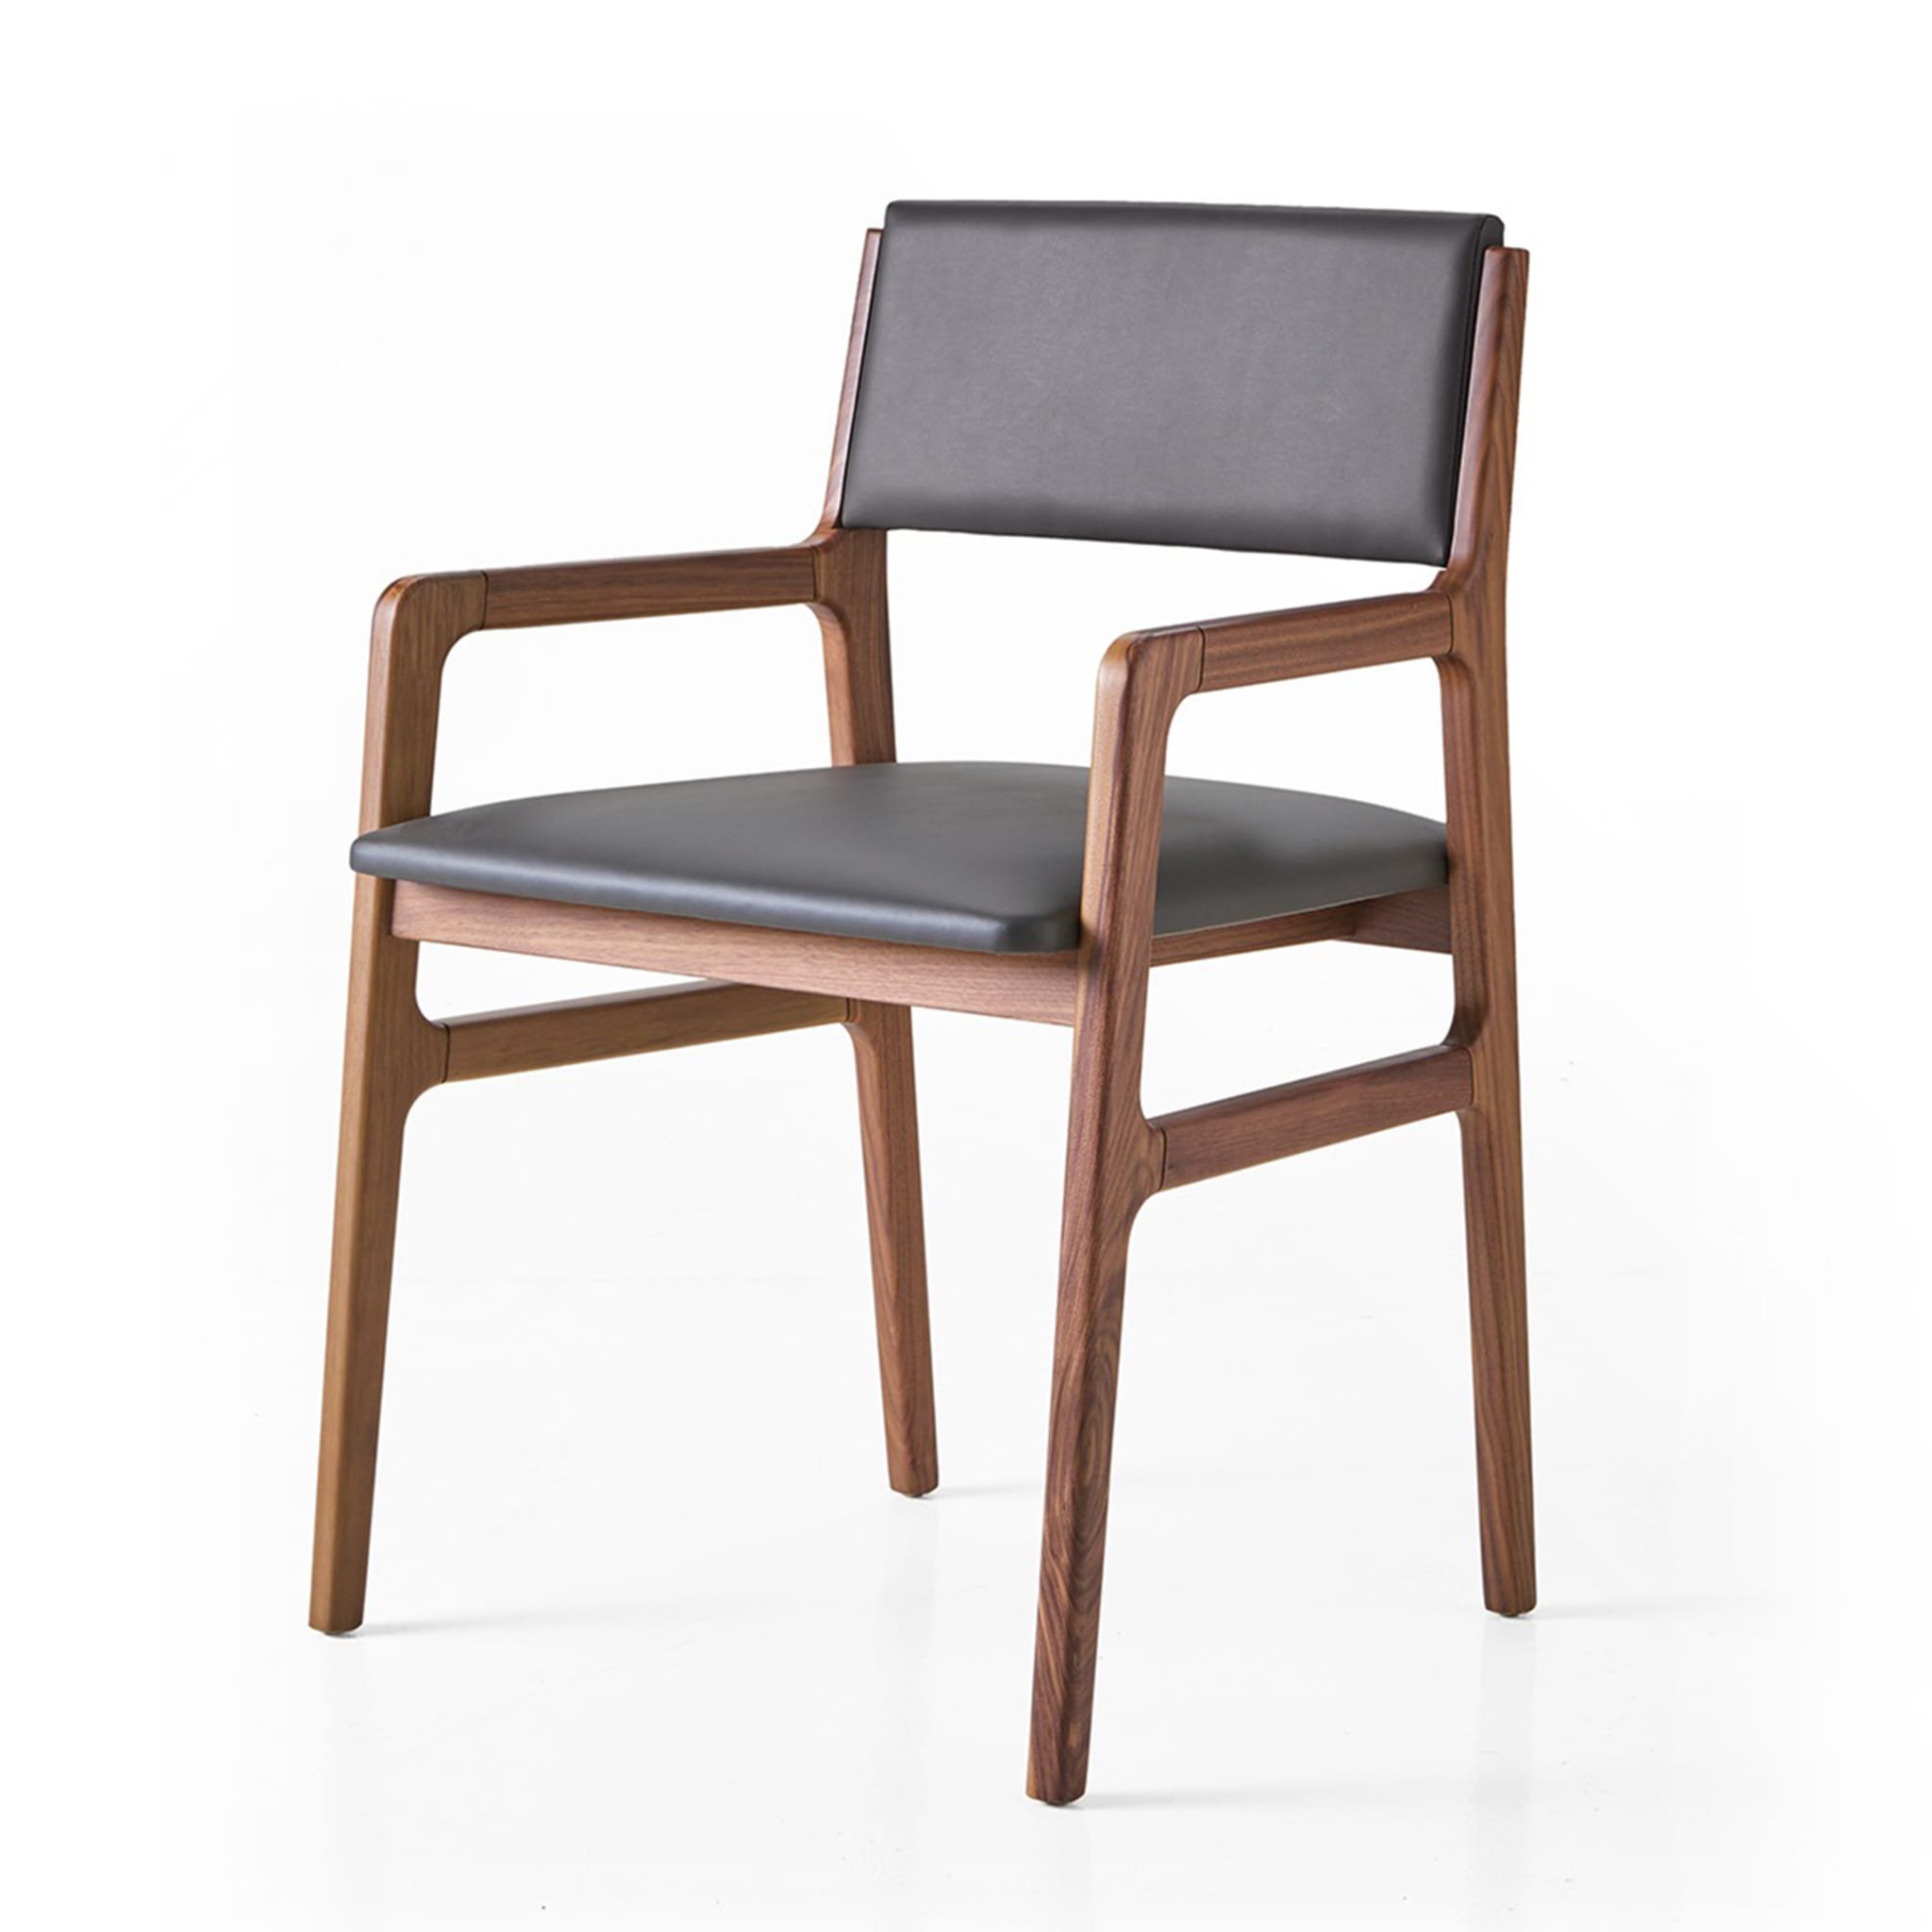 Shanghai chair with armrests - Alternative view 1